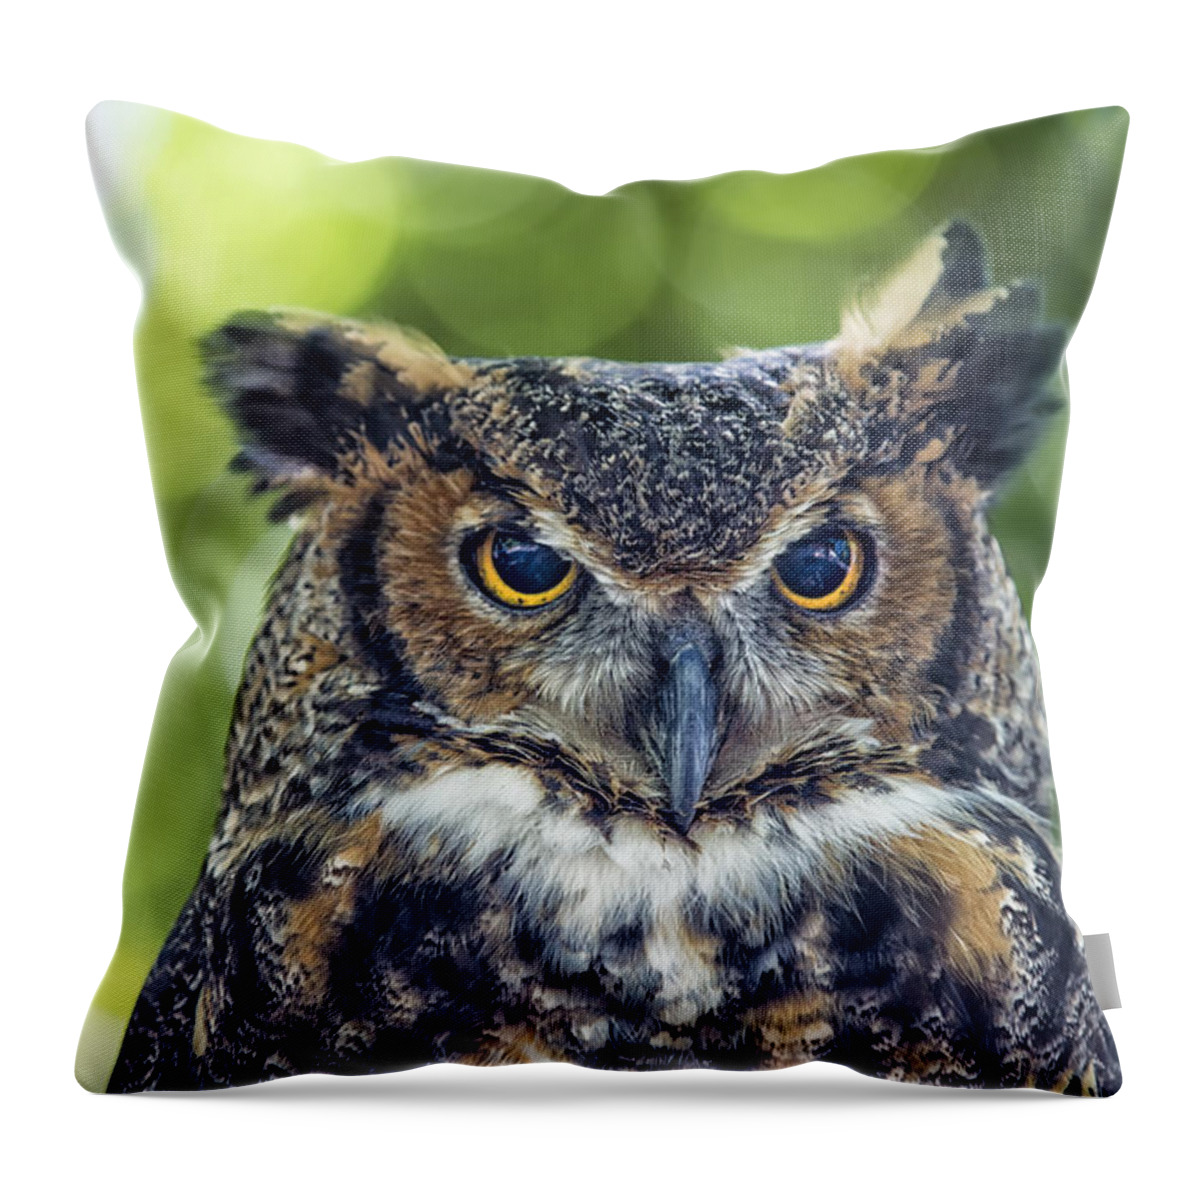 Owl Throw Pillow featuring the photograph Horned Owl Up Close by Bill and Linda Tiepelman